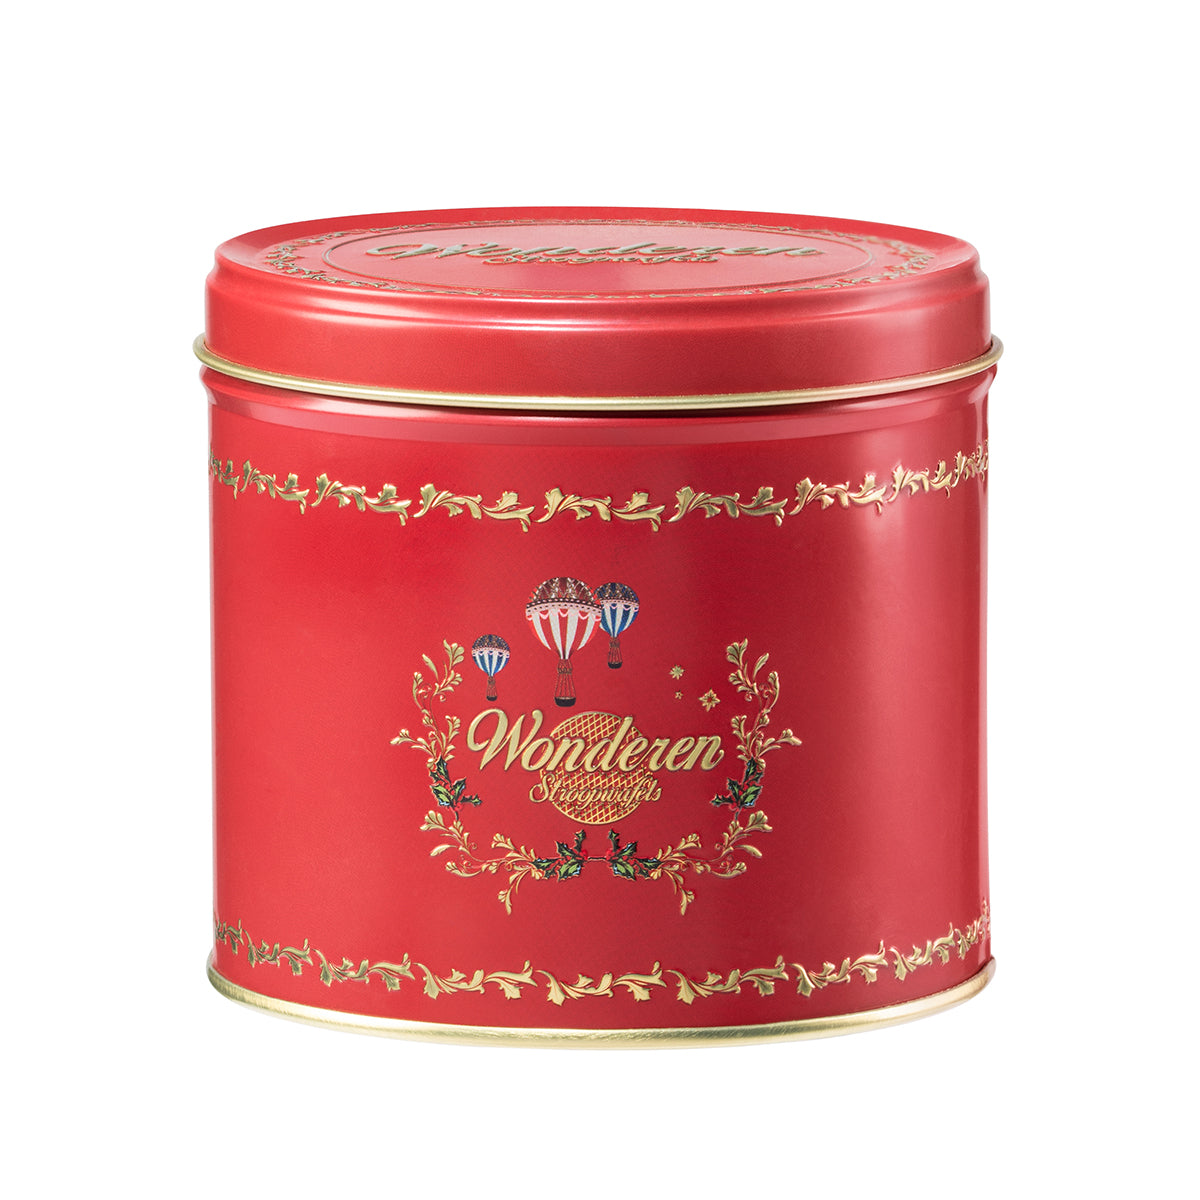 An Authentic Red Stroopwafel Tin Can with the brand name Wonderen Stroopwafels on it.